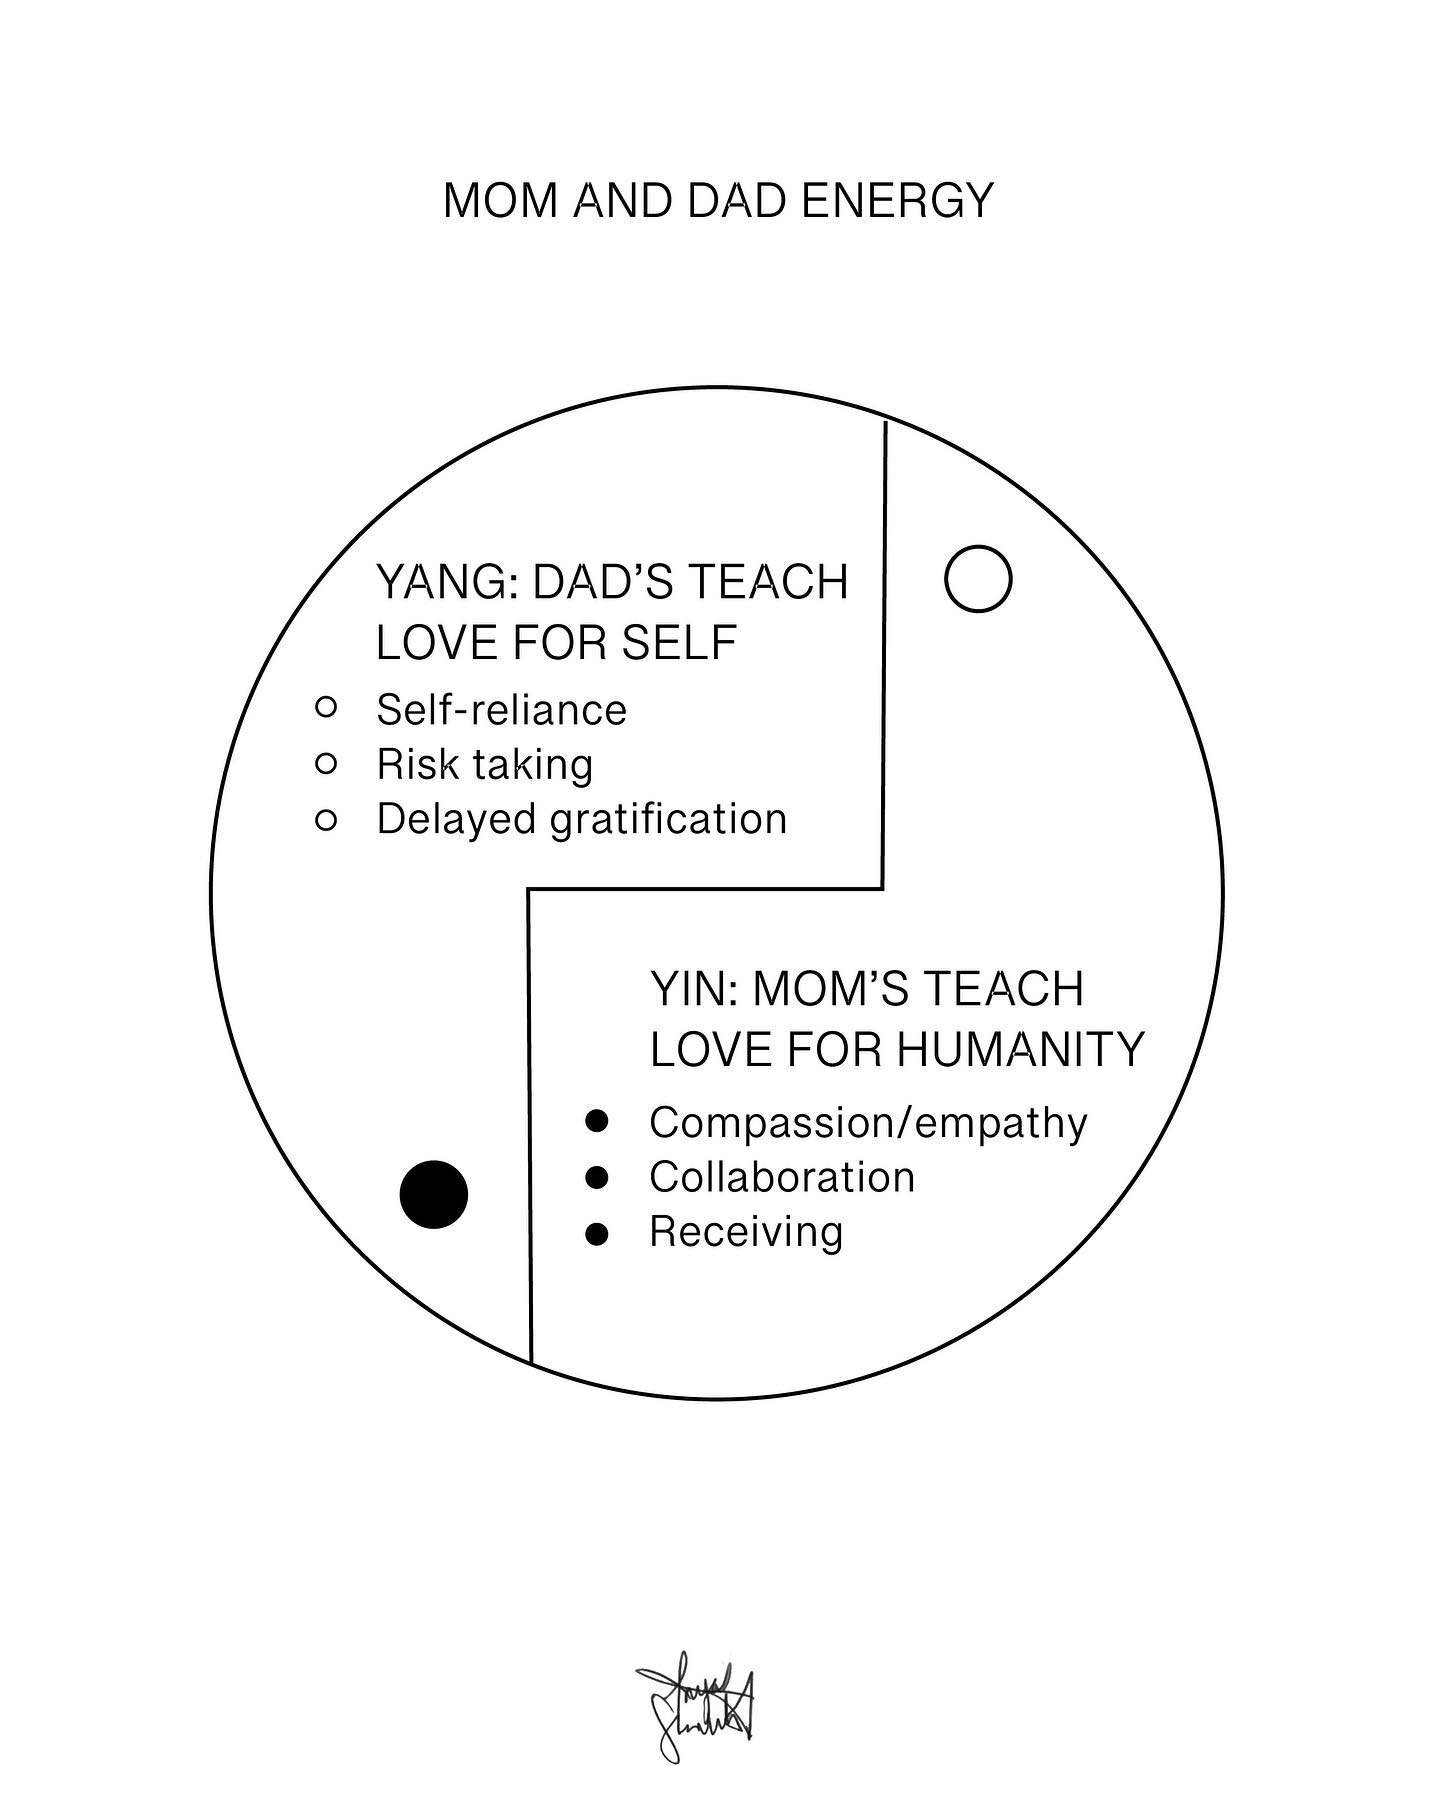 MOM and DAD energy ☯️

Everything lives on a spectrum and the sweet spot is right in the middle. When we have both feminine and masculine energy present in the household, you get balanced little humans.

When there&rsquo;s too little of one, the othe